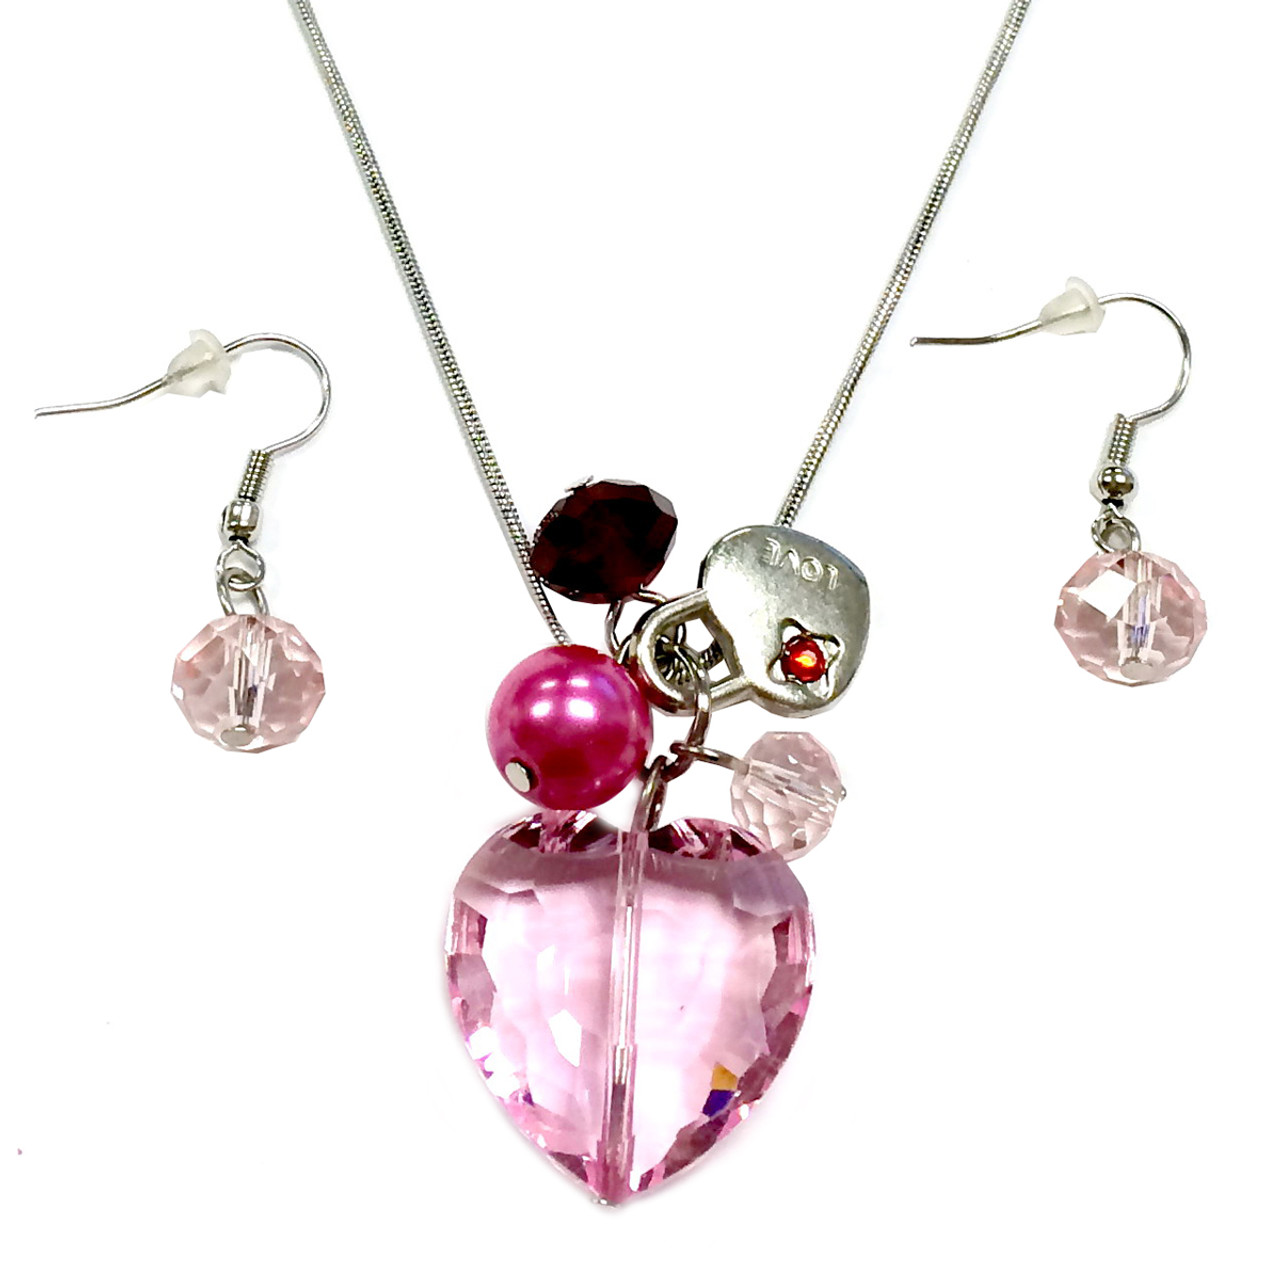 Mixit Hypoallergenic Silver Tone Pendant Necklace & Stud Earrings 2-pc.  Cubic Zirconia Heart Jewelry Set - JCPenney